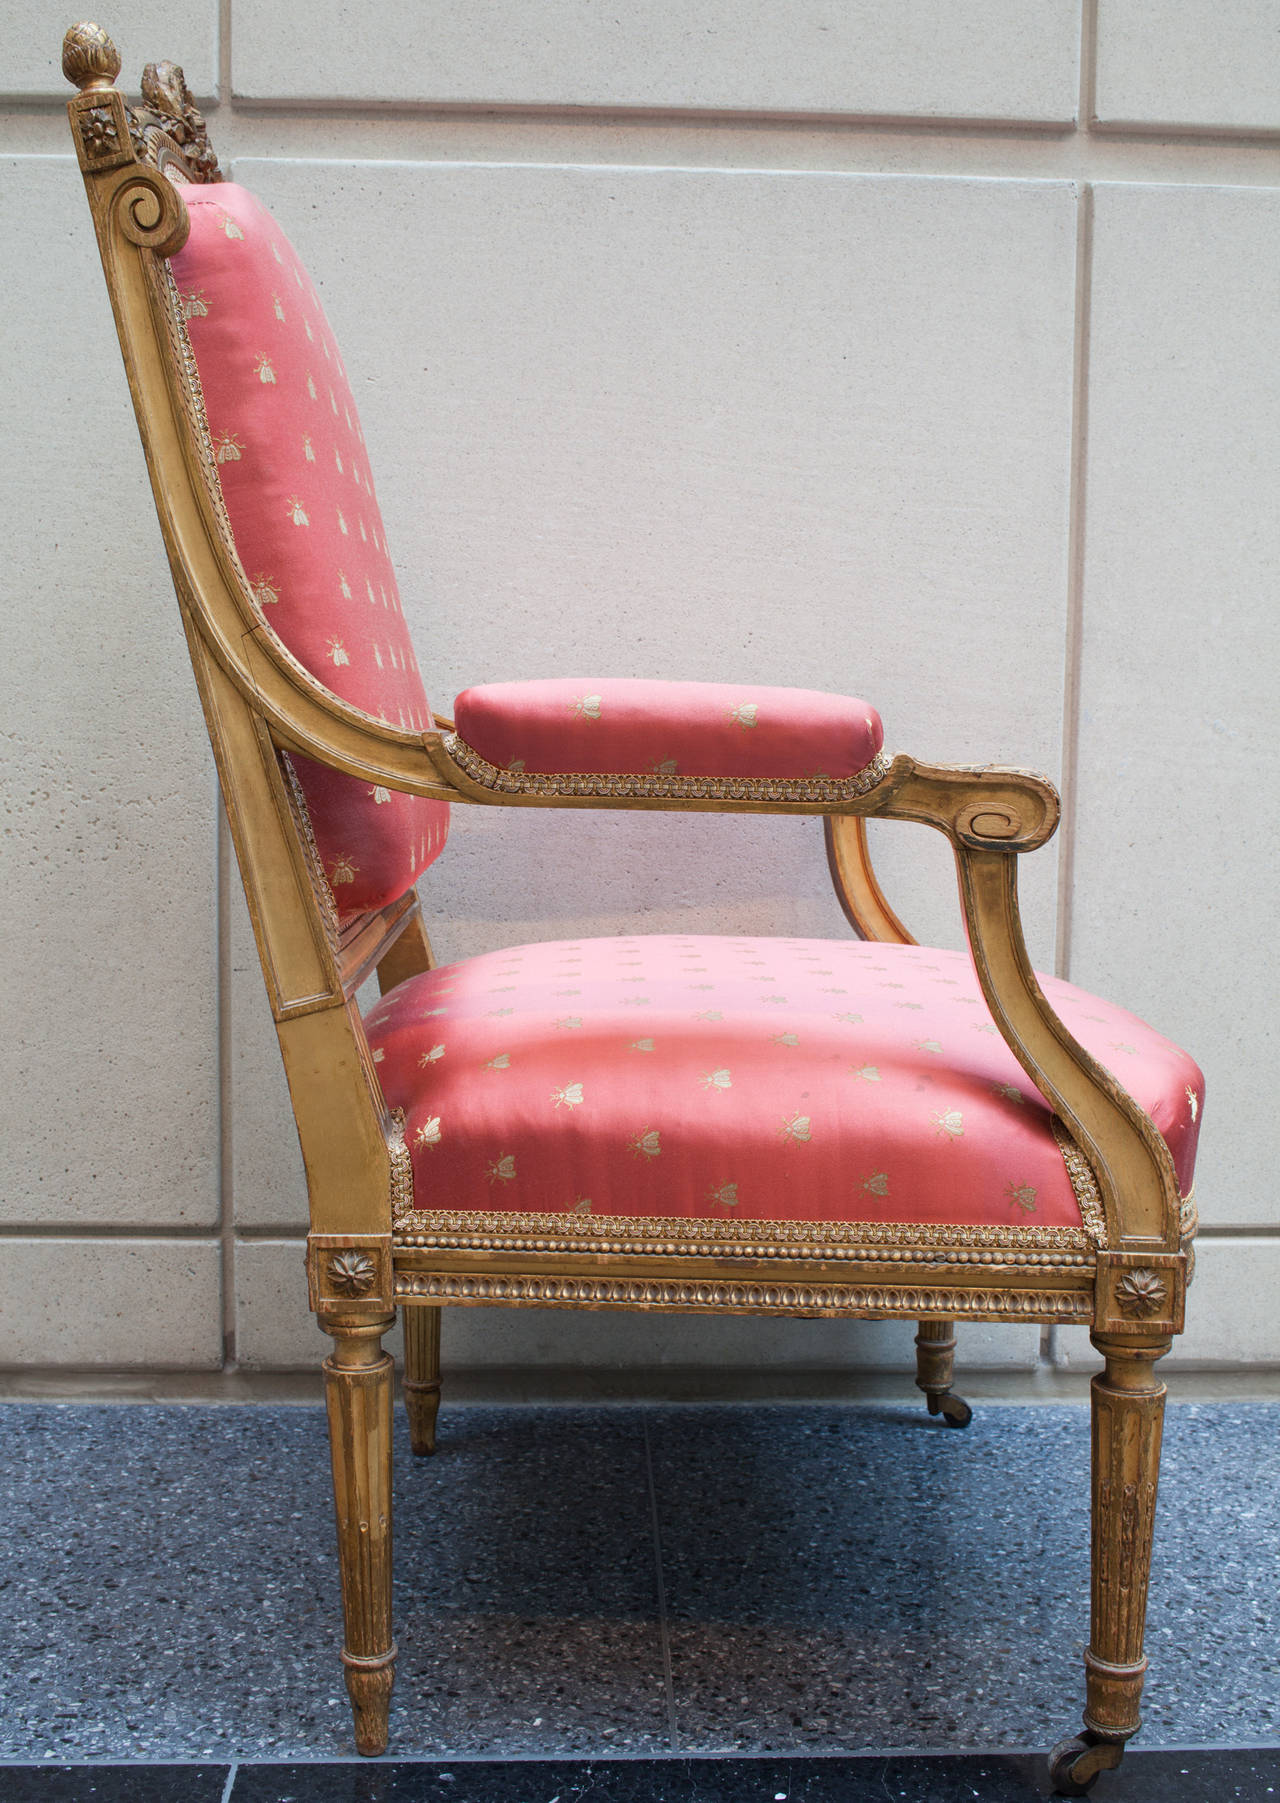 This pair of bois doré period Napoleon III fauteuils are in the style of Louis XVI. The gilt finish is in Fine shape and the carved elements all refer to neo-classicism. The crest rail is topped by a laurel wreath. The hand rests and knees are